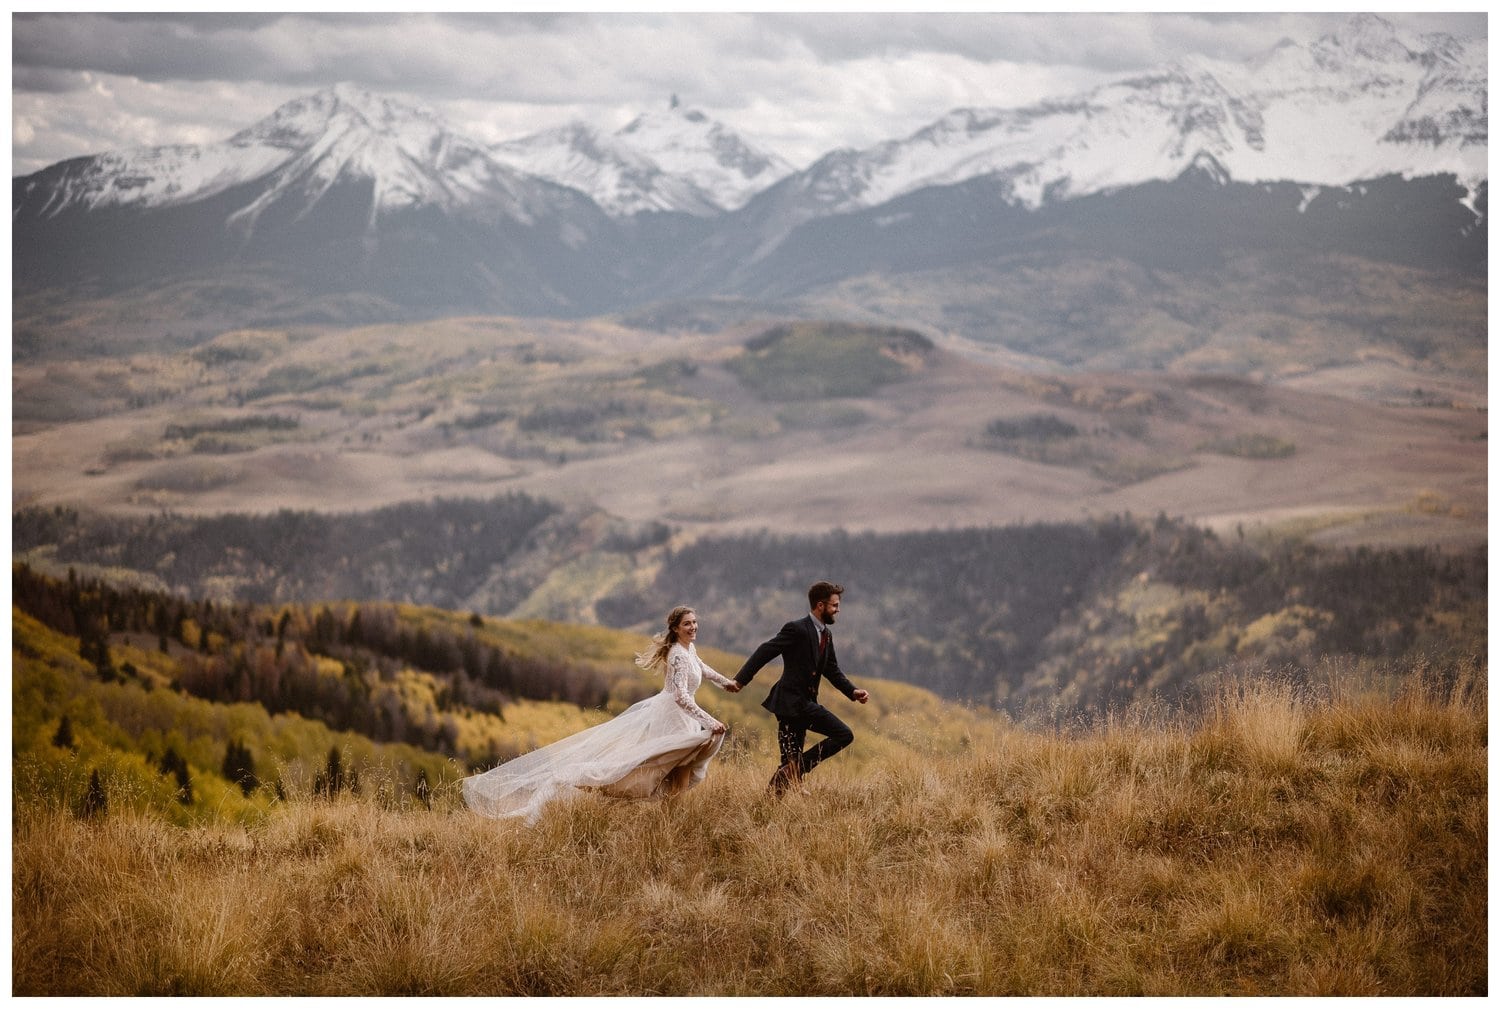 Bride and groom holding hands and running through a grassy meadow on their elopement day. There are snow-capped mountains in the background. 